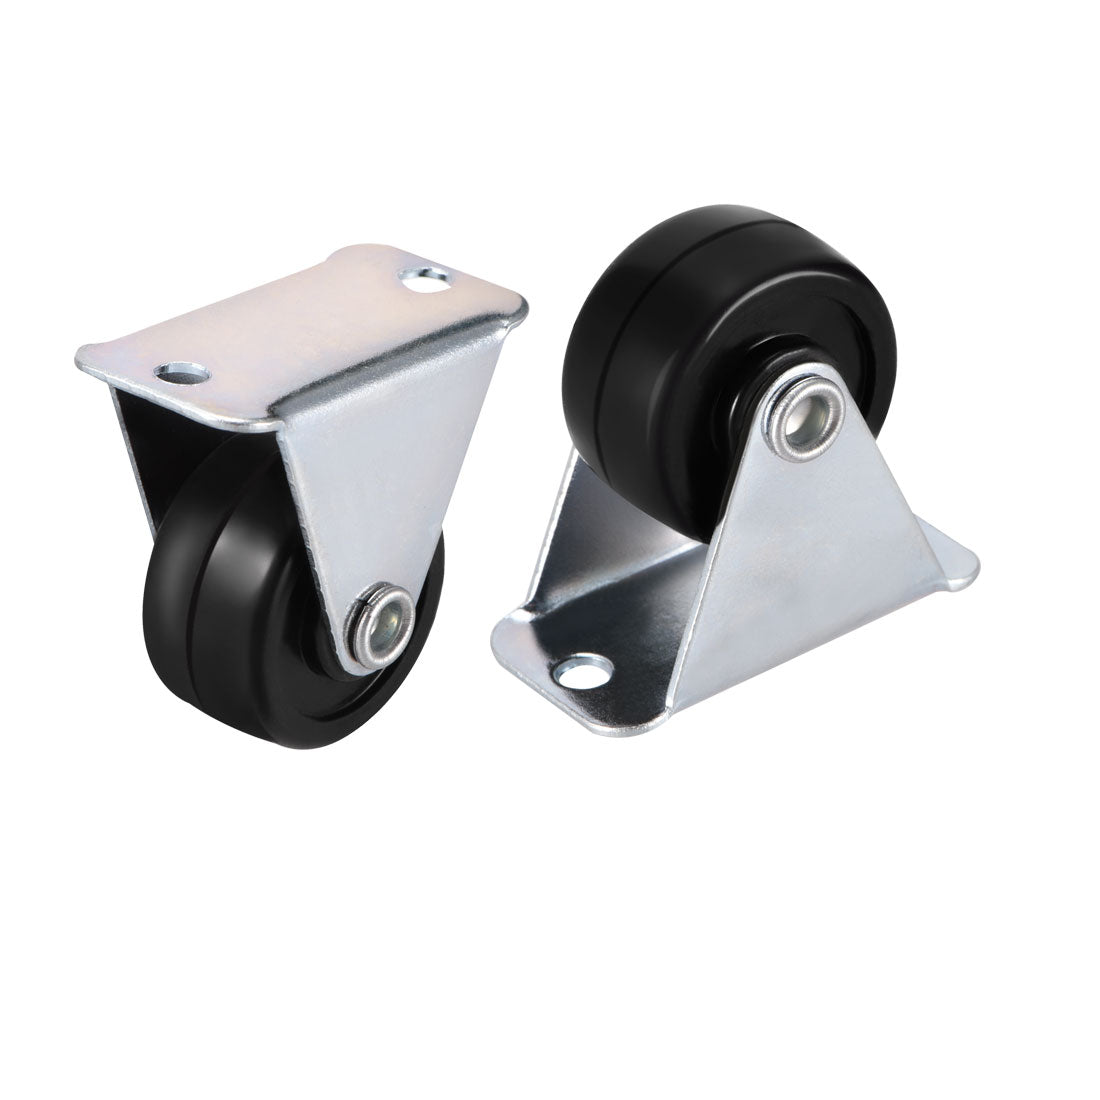 Uxcell Uxcell 1.25 Inch Fixed Casters Wheels Rubber Top Plate Mounted Caster Wheel 22lb Capacity 2 Pcs